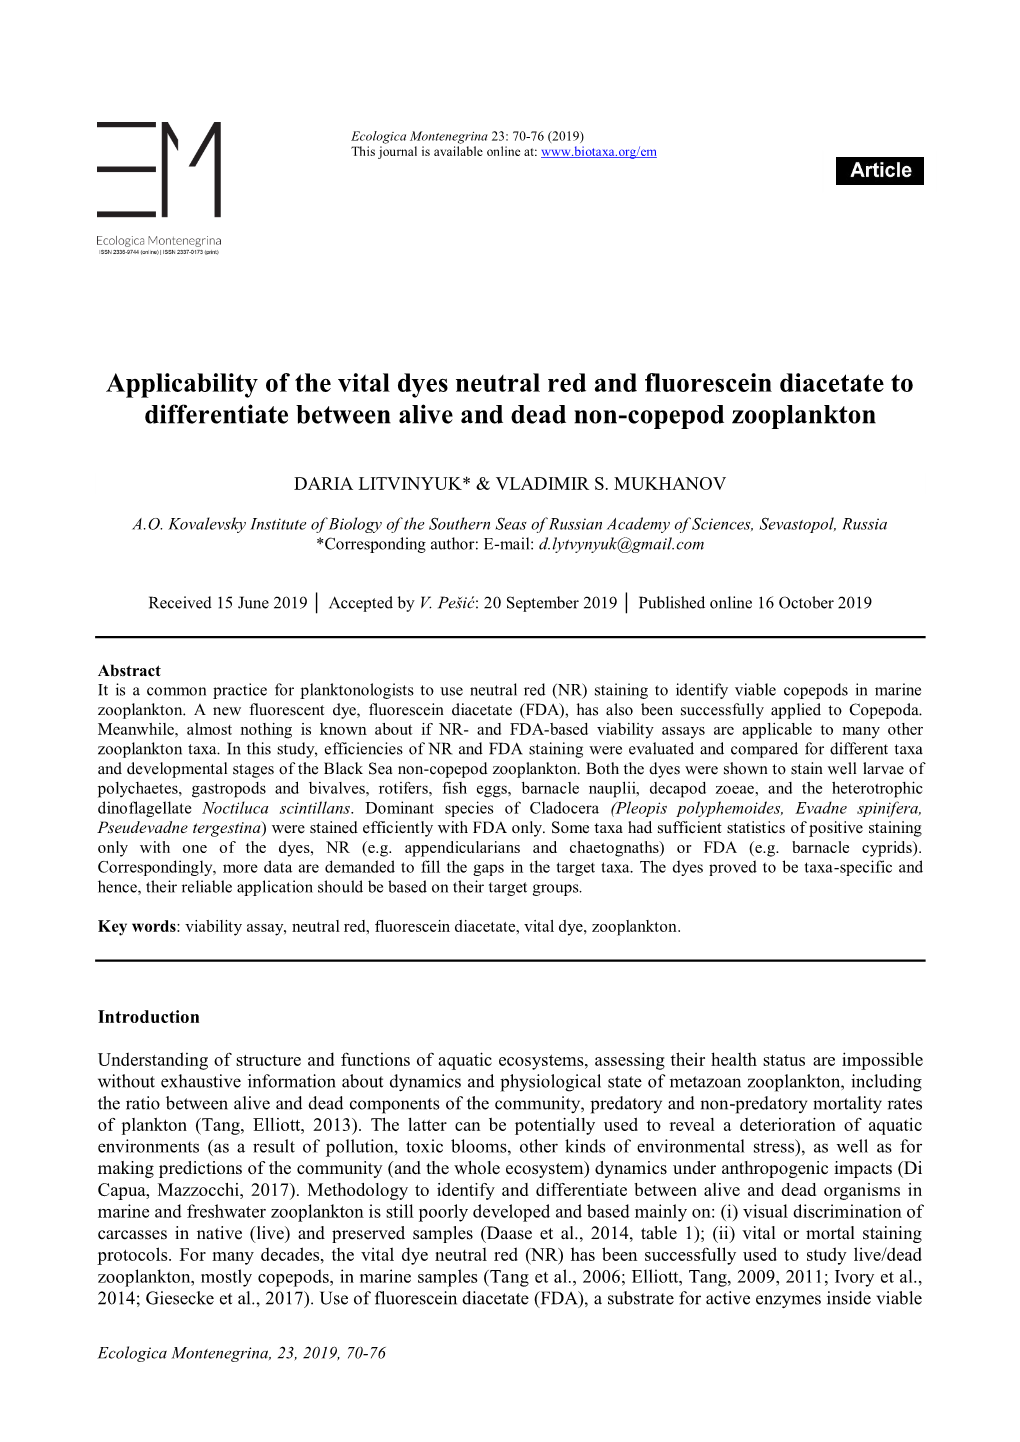 Applicability of the Vital Dyes Neutral Red and Fluorescein Diacetate to Differentiate Between Alive and Dead Non-Copepod Zooplankton